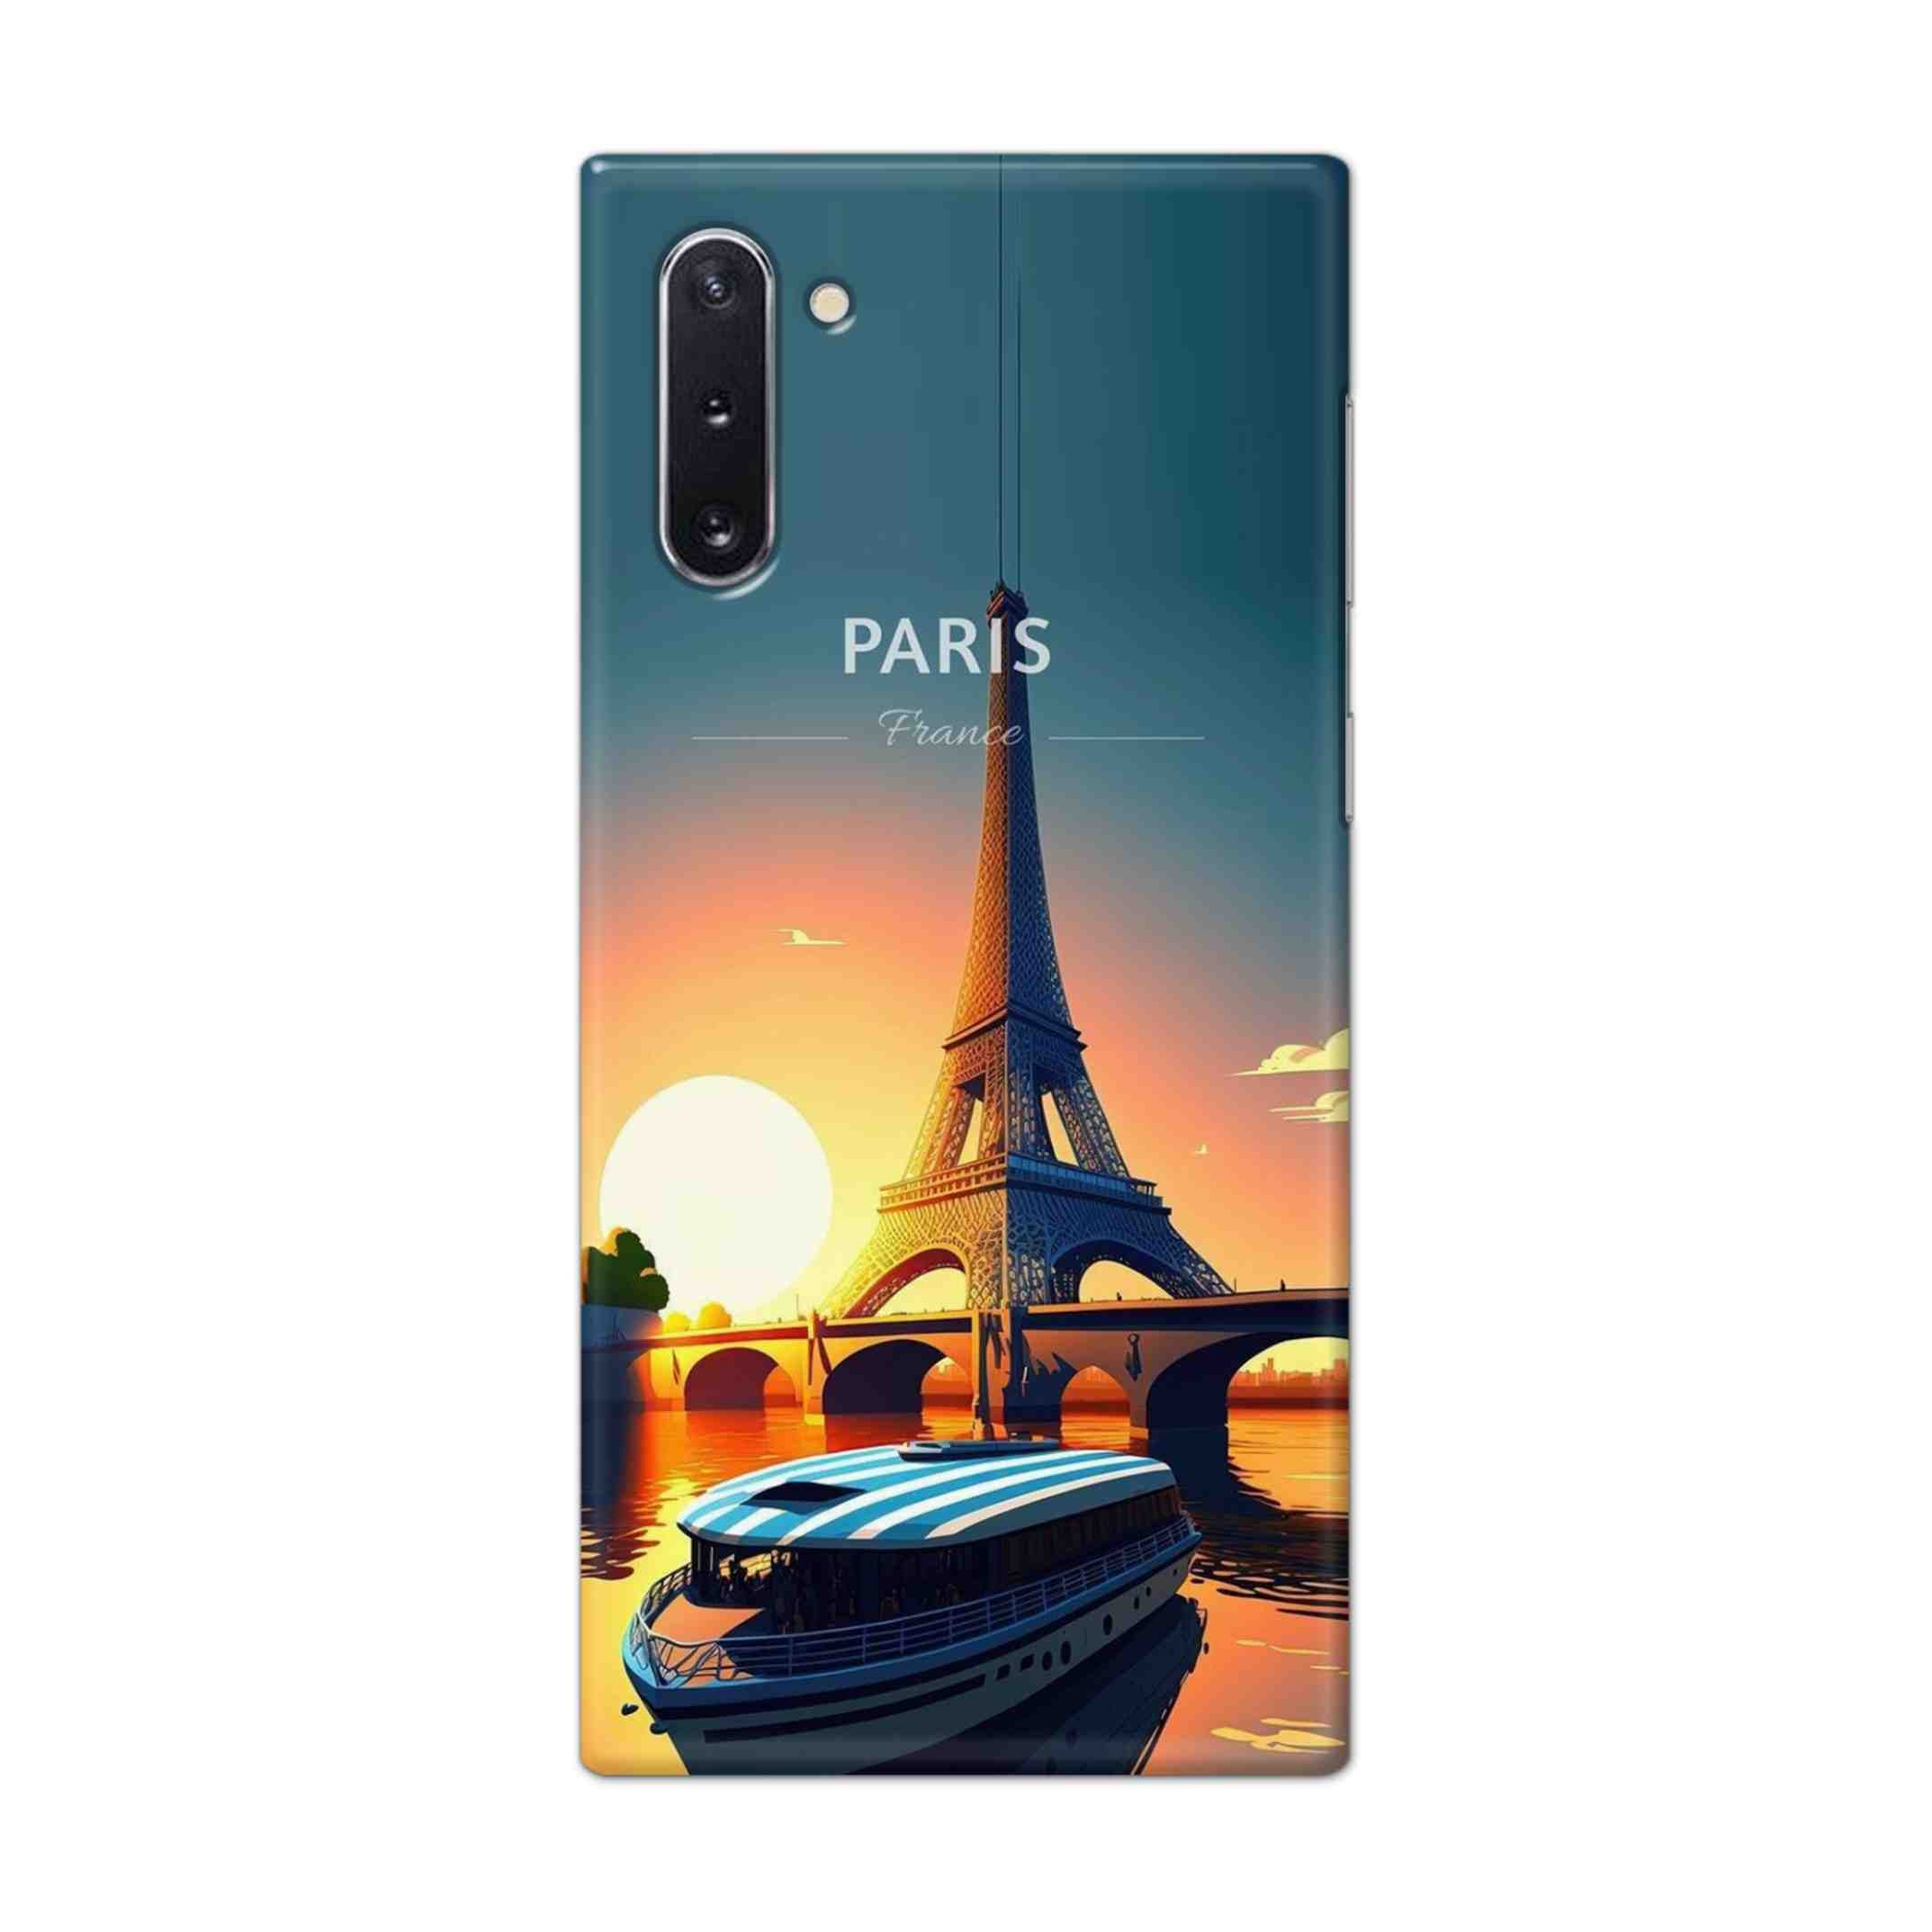 Buy France Hard Back Mobile Phone Case Cover For Samsung Galaxy Note 10 Online